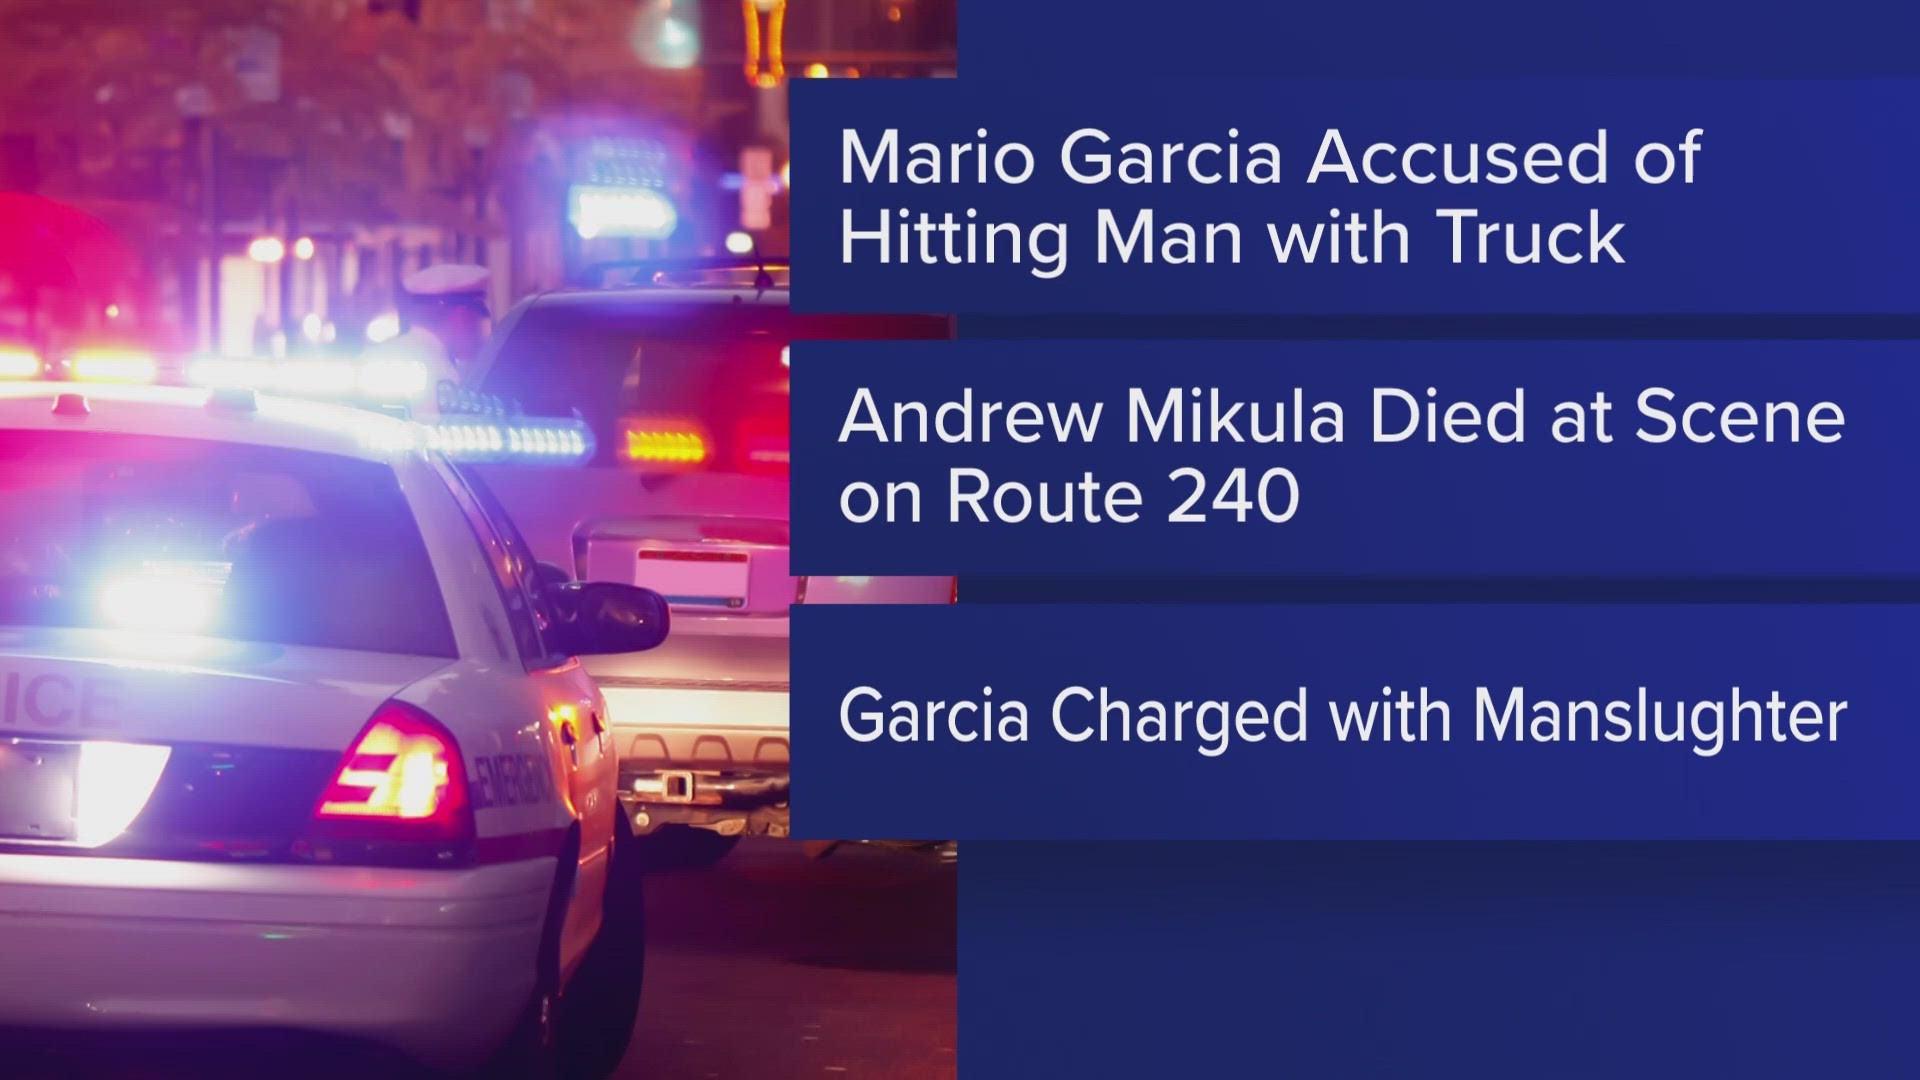 Officials say 39-year-old Mario Garcia allegedly hit 64-year-old Andrew Mikula with his truck on purpose on Route 2-40.